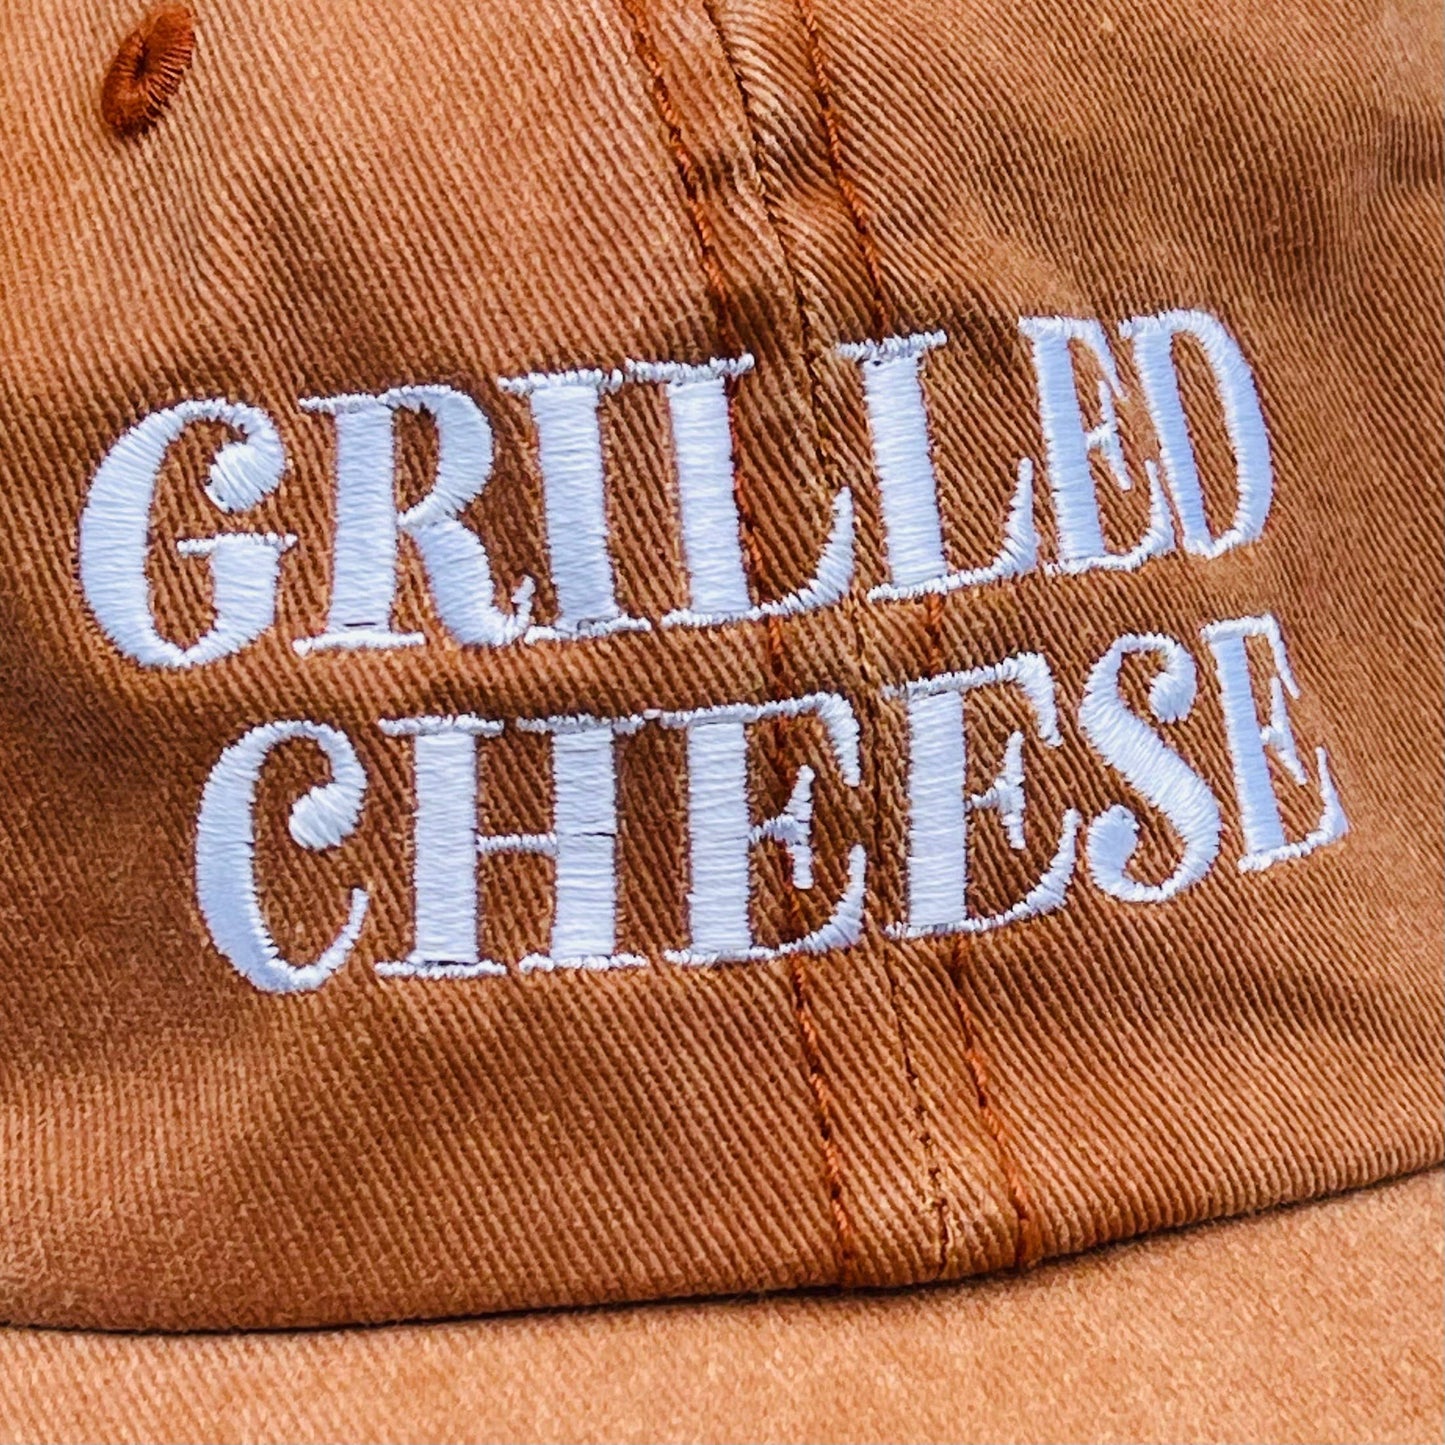 Grilled Cheese Baseball Cap